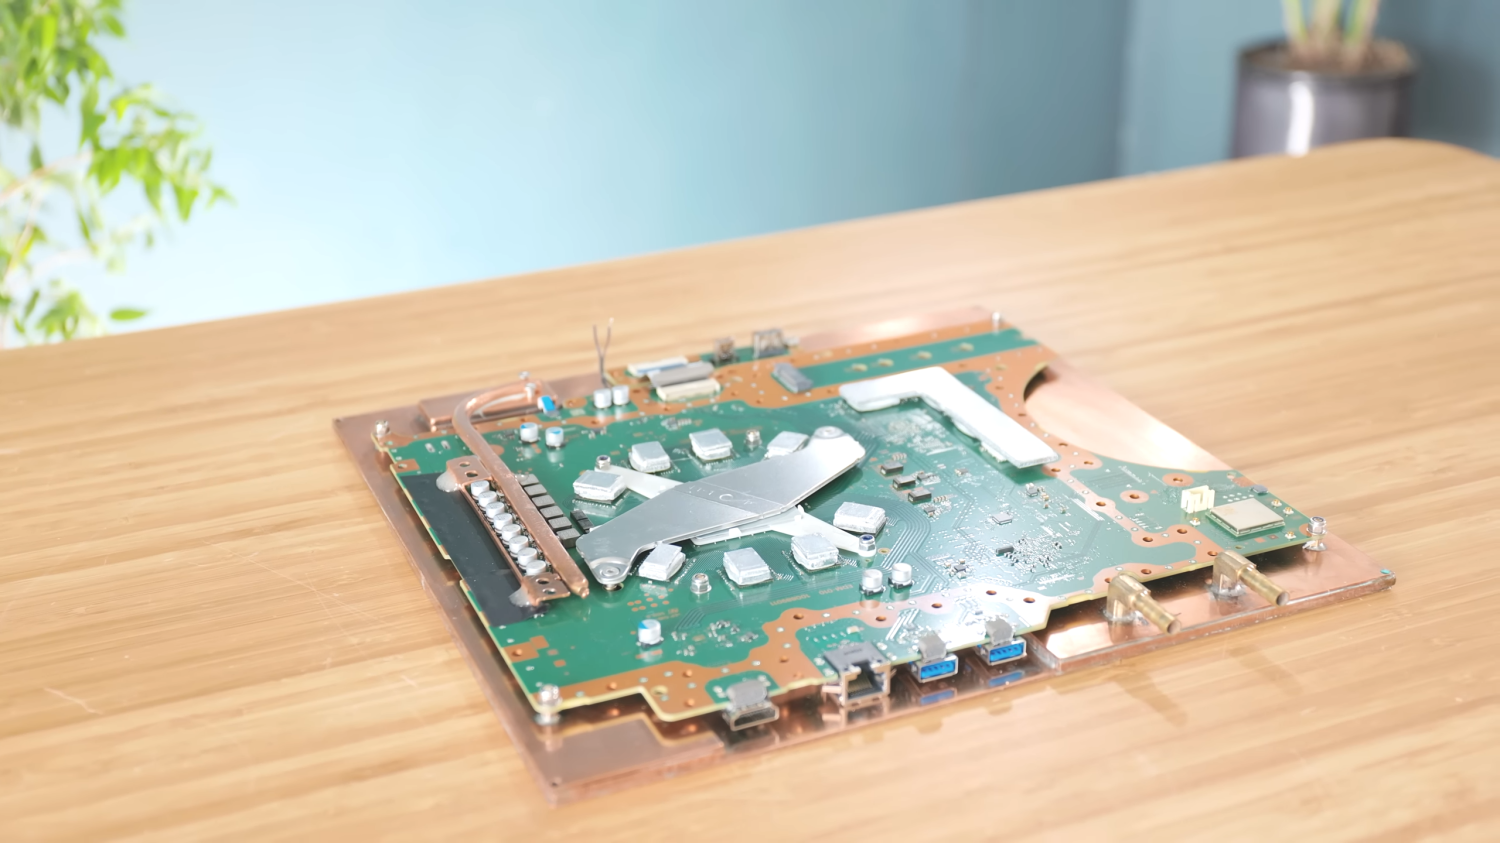 PlayStation 5 Slim teardowns show changes to cooling and the